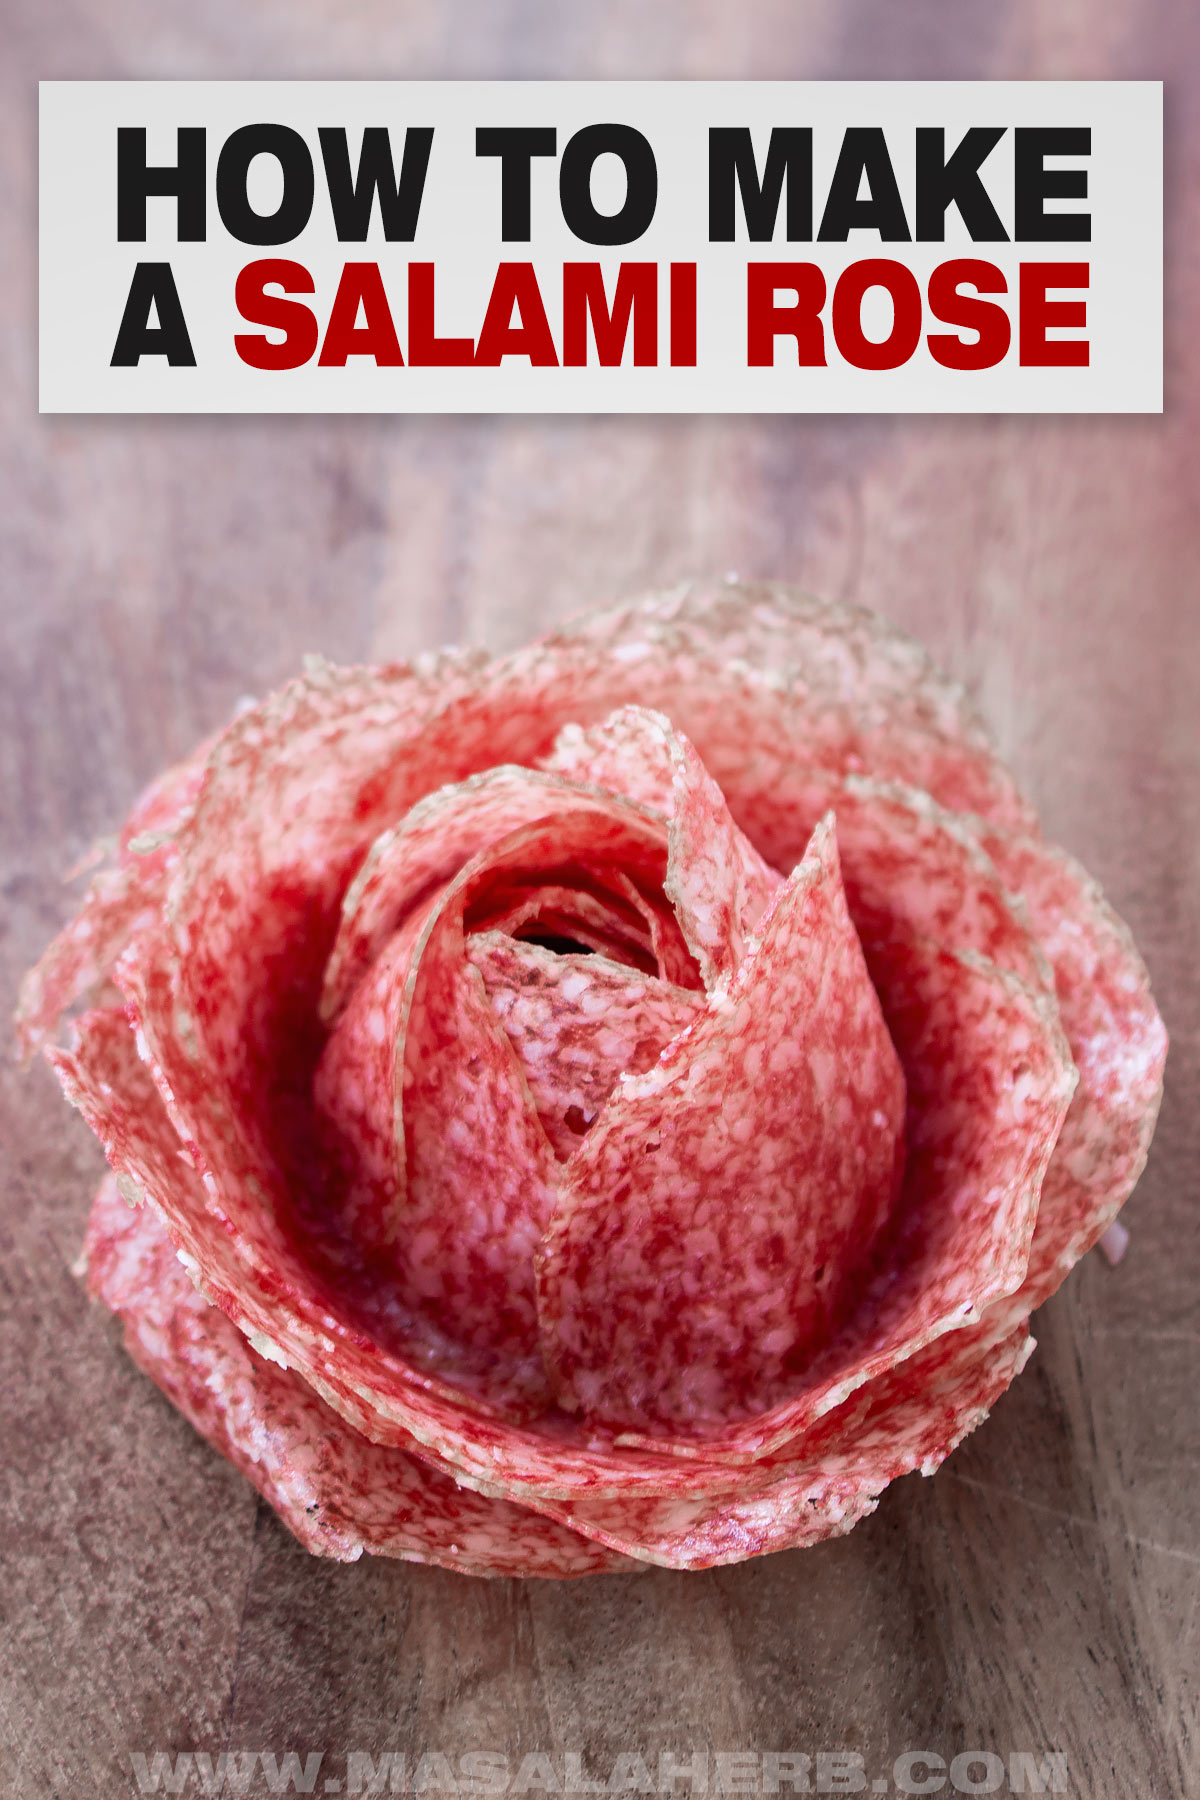 How to make a Salami Rose cover image